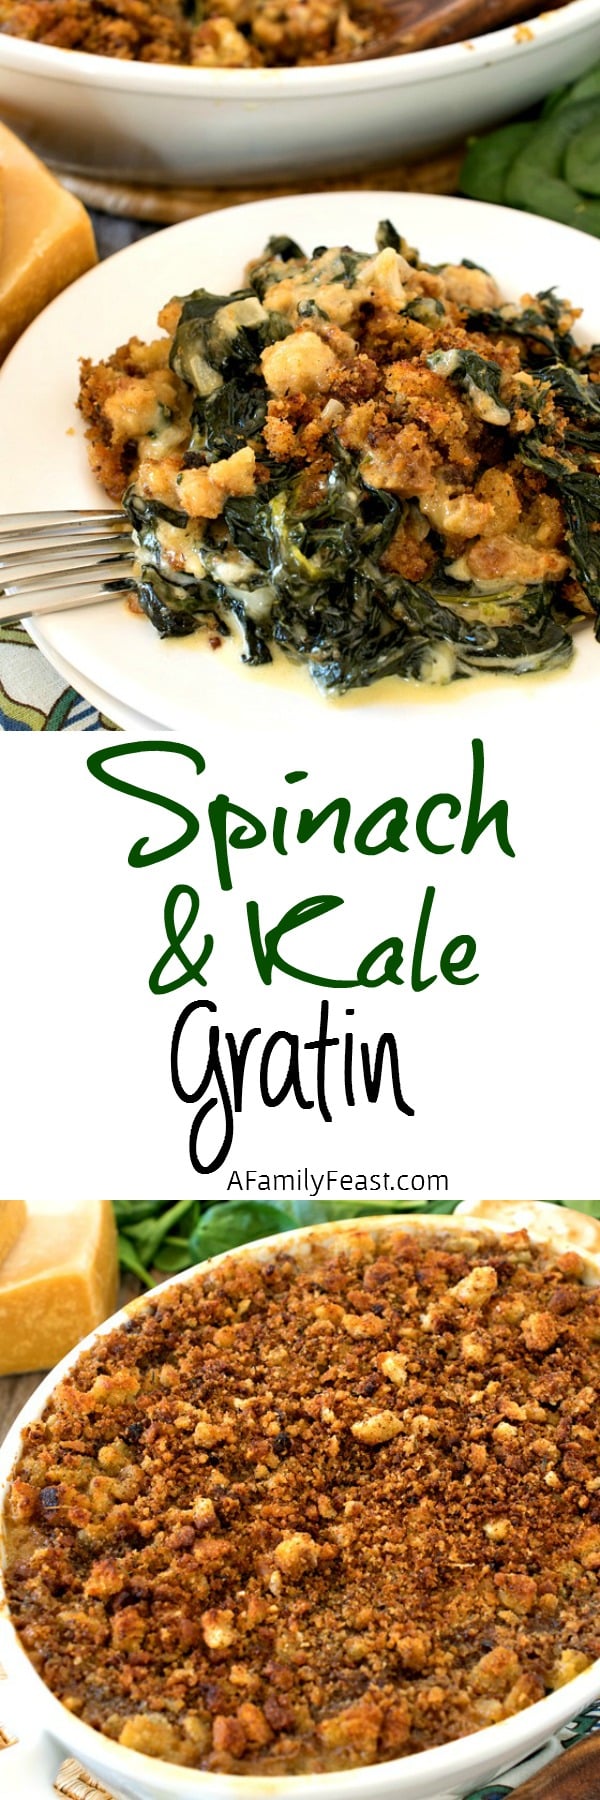 Our Spinach and Kale Gratin is the ultimate winter comfort food and a delicious addition to any holiday menu!